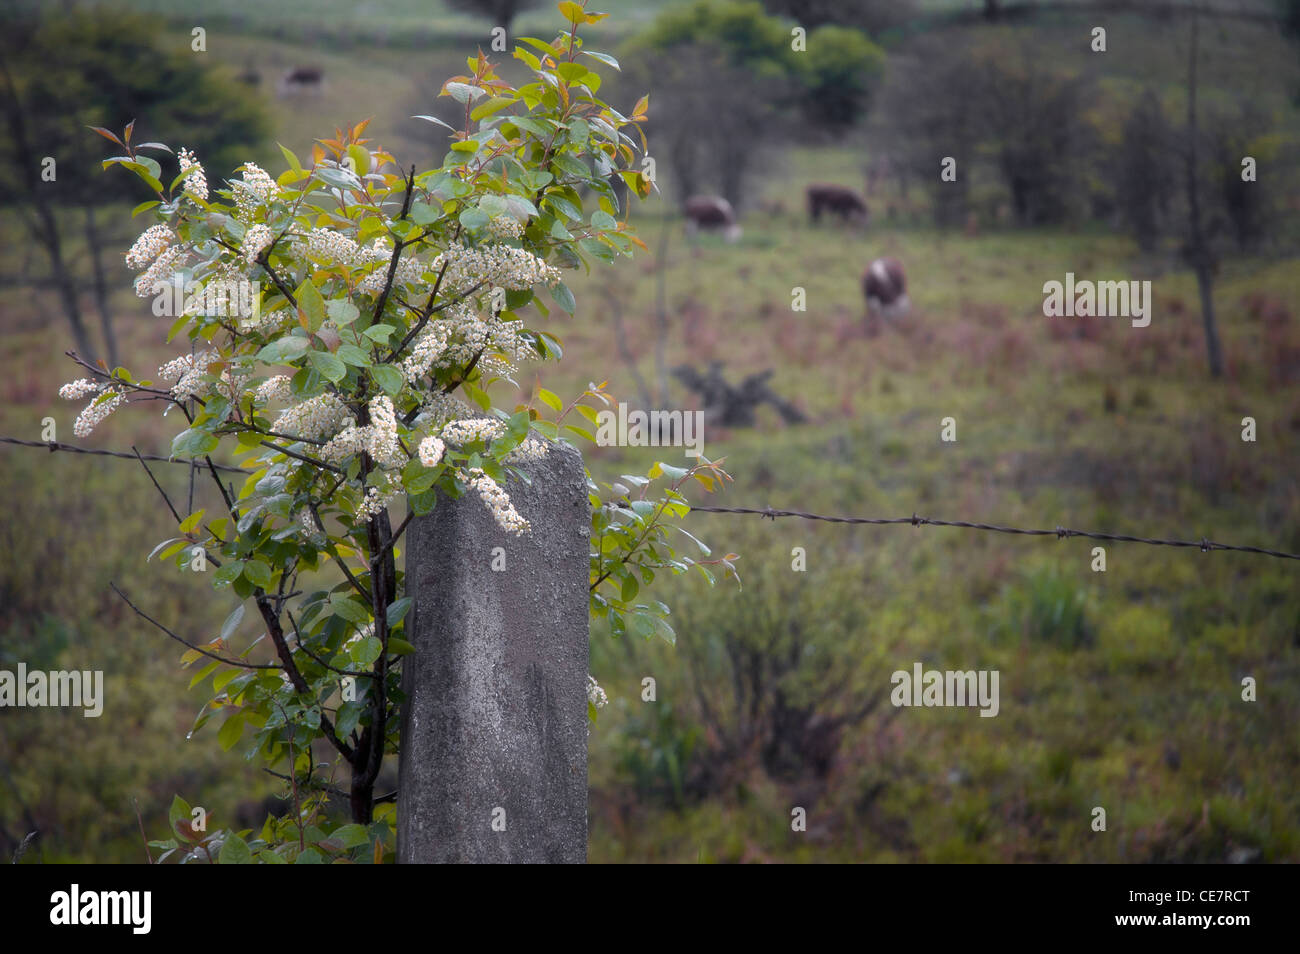 a flowering plant near barbed wire fence and cows grazing in the distance Stock Photo